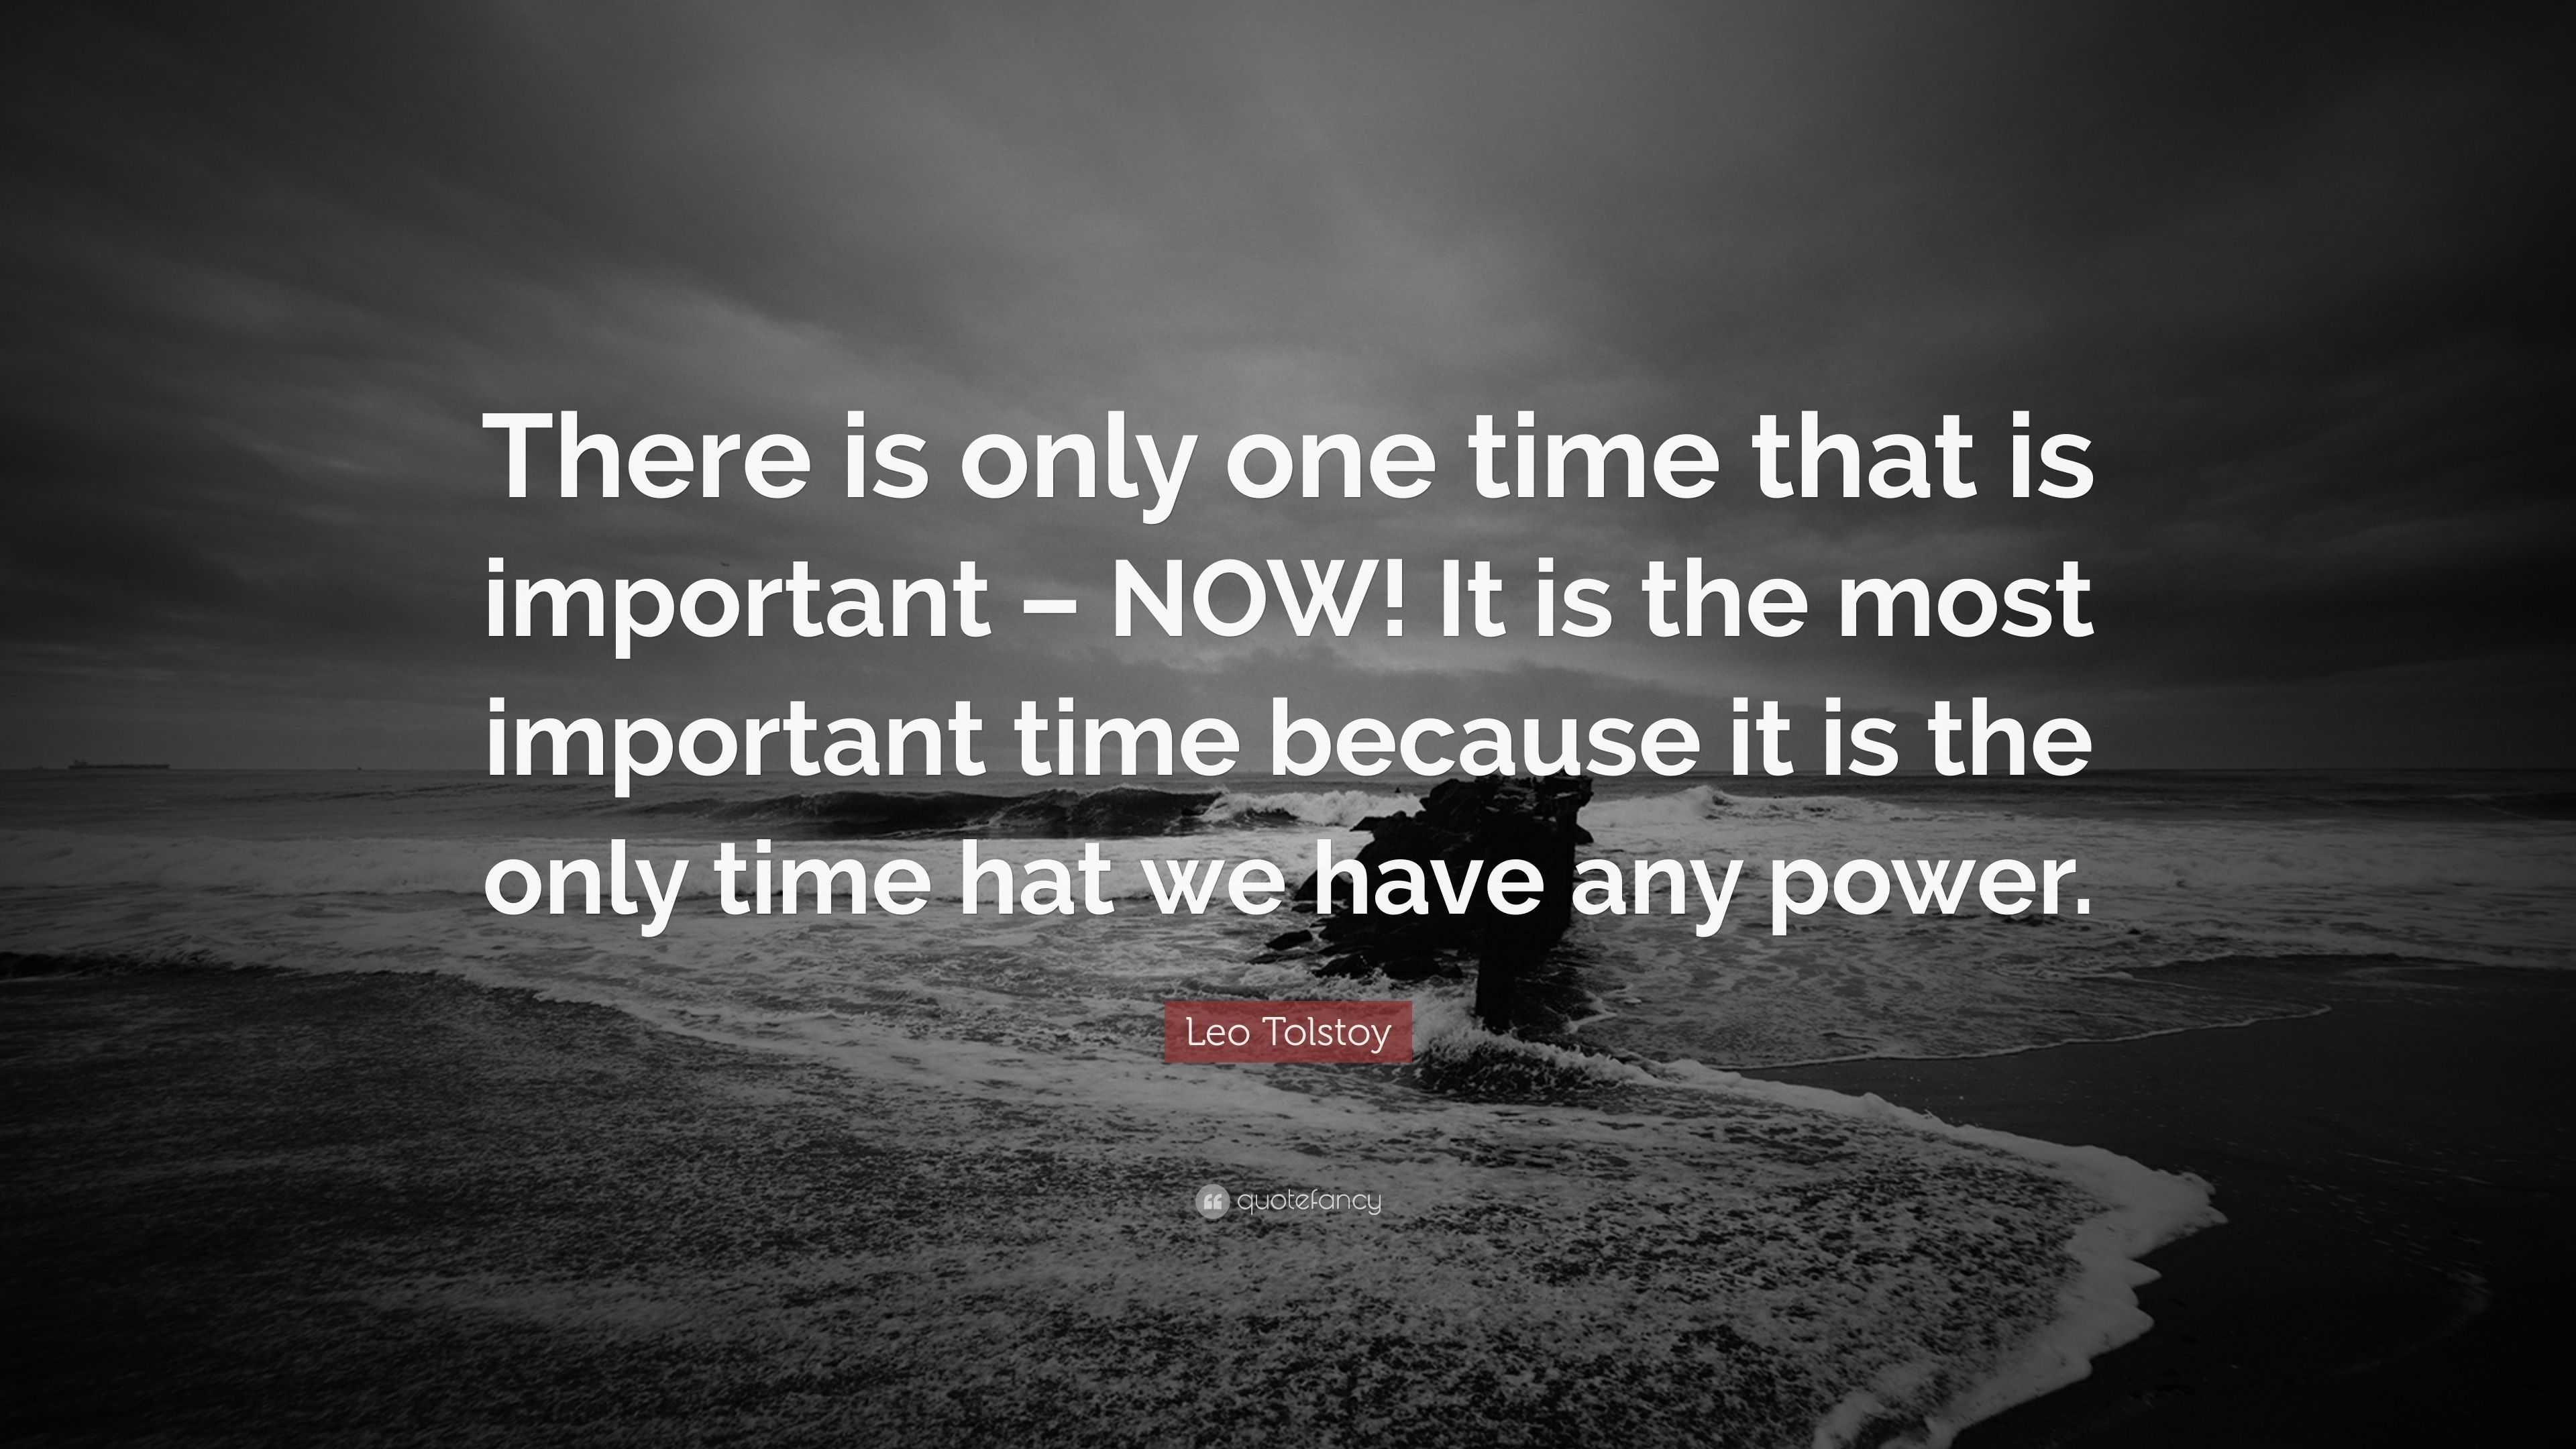 Leo Tolstoy Quote: “There is only one time that is important – NOW! It ...